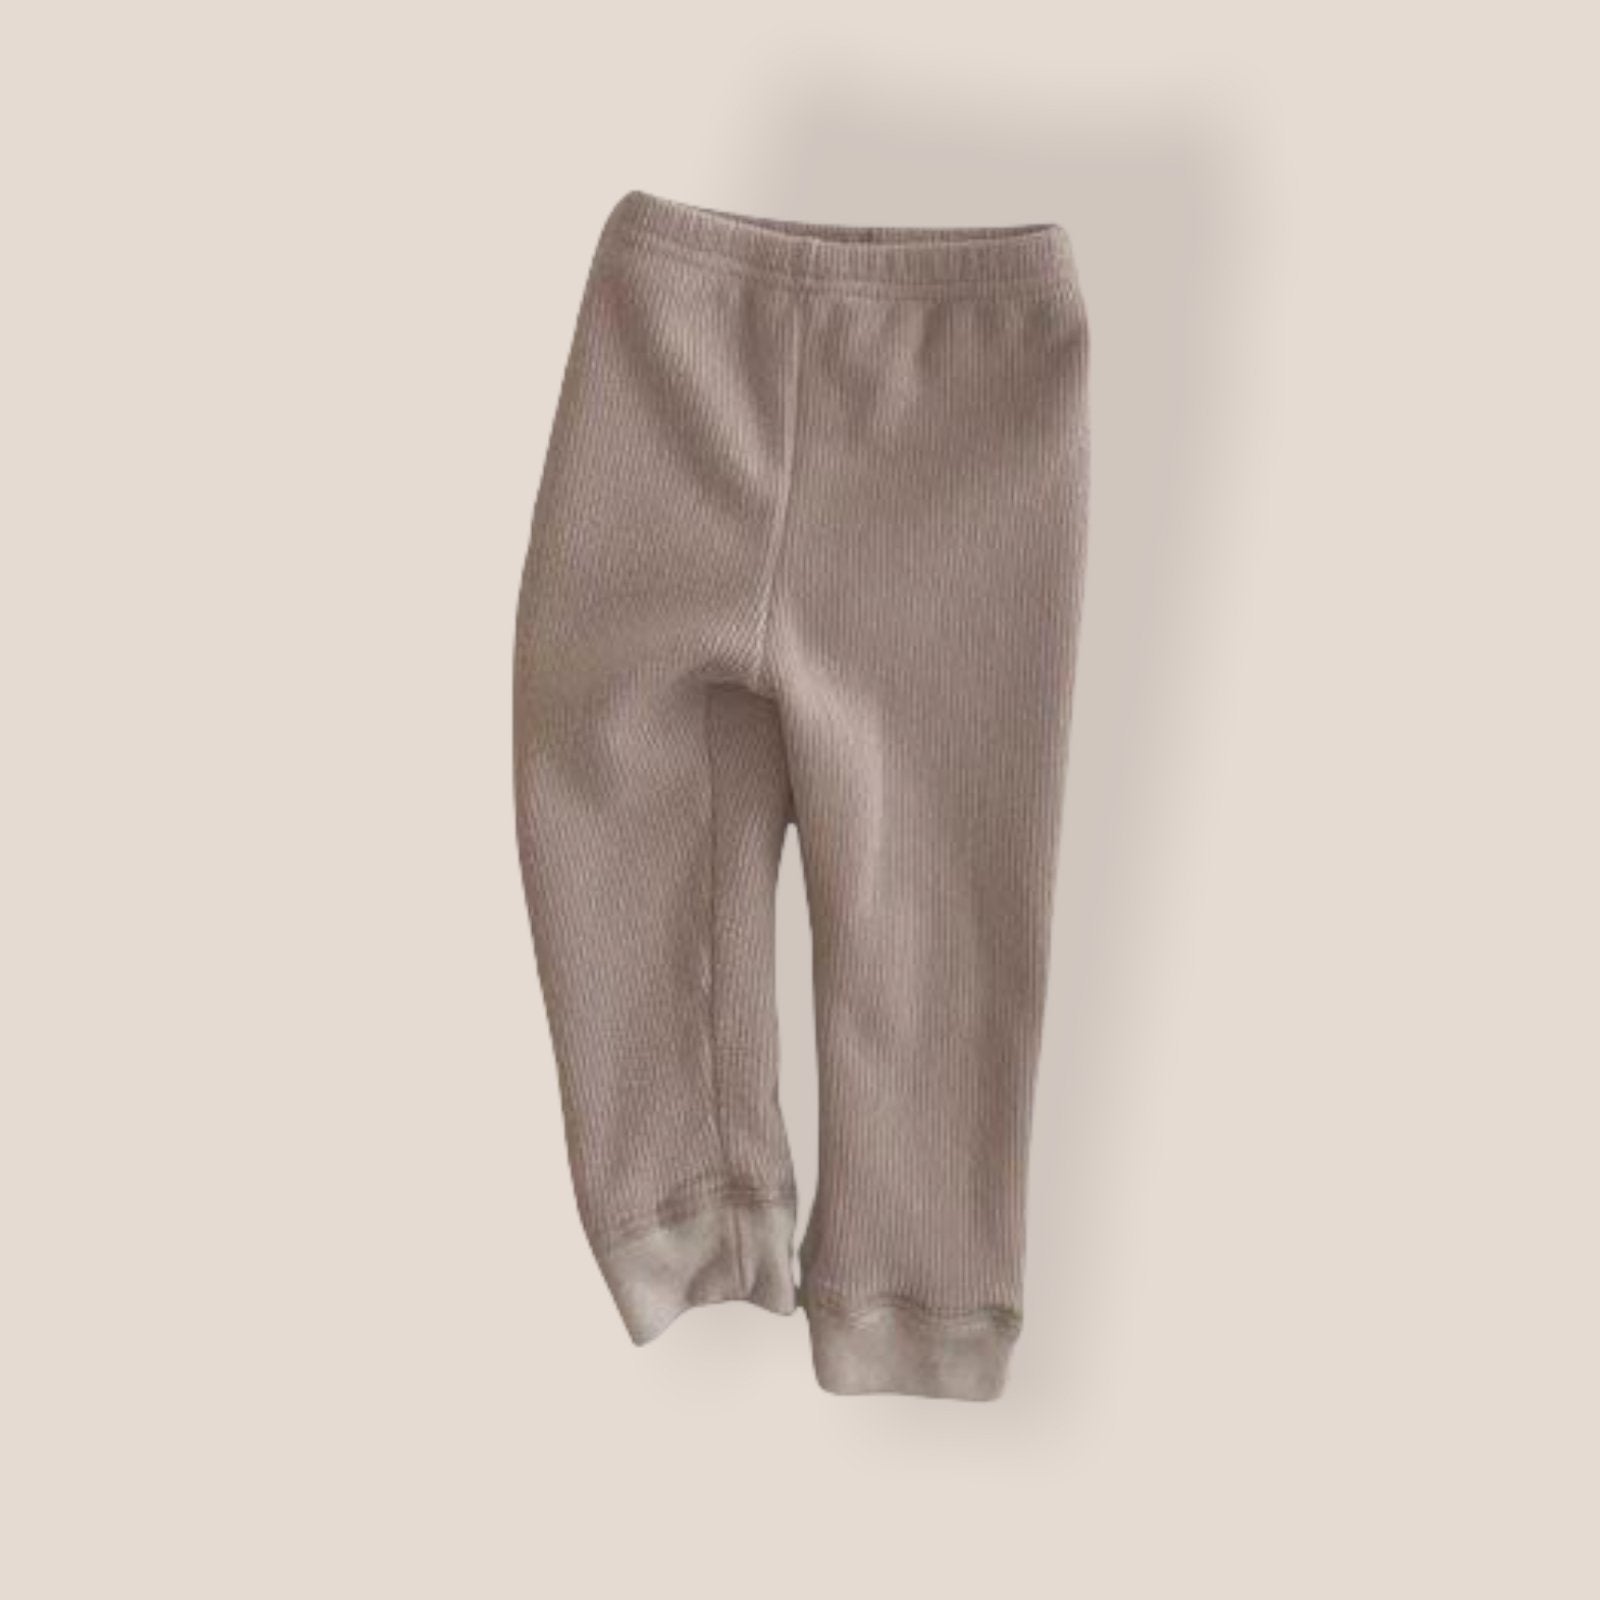 Mini Rib Leggings find Stylish Fashion for Little People- at Little Foxx Concept Store